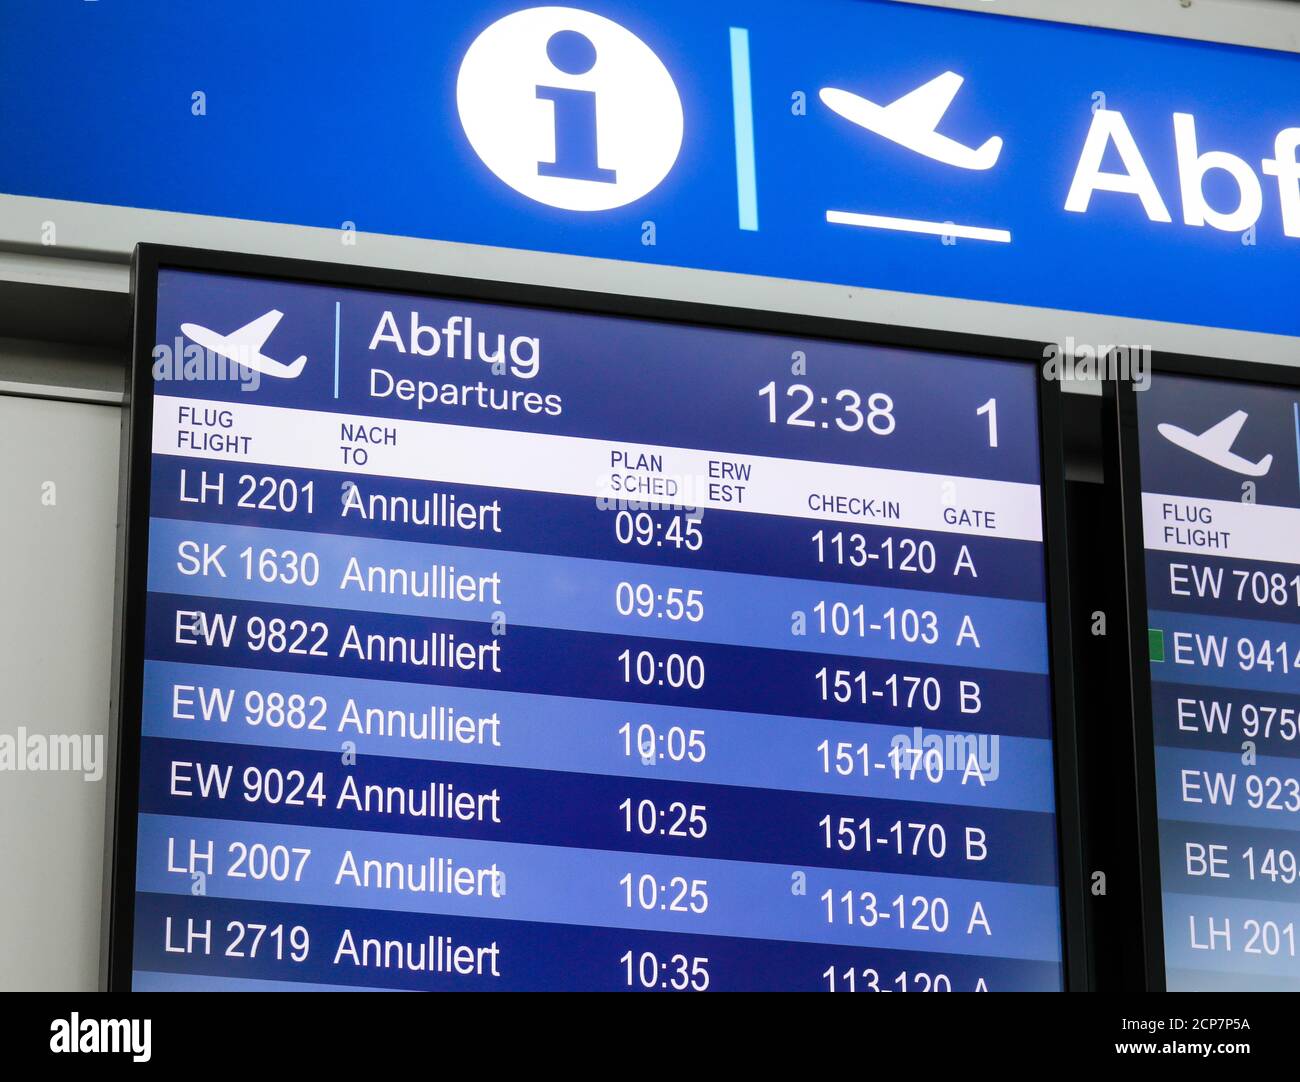 Duesseldorf, North Rhine-Westphalia, Germany - Duesseldorf International Airport, DUS, display board with canceled flights, here on the occasion of a Stock Photo